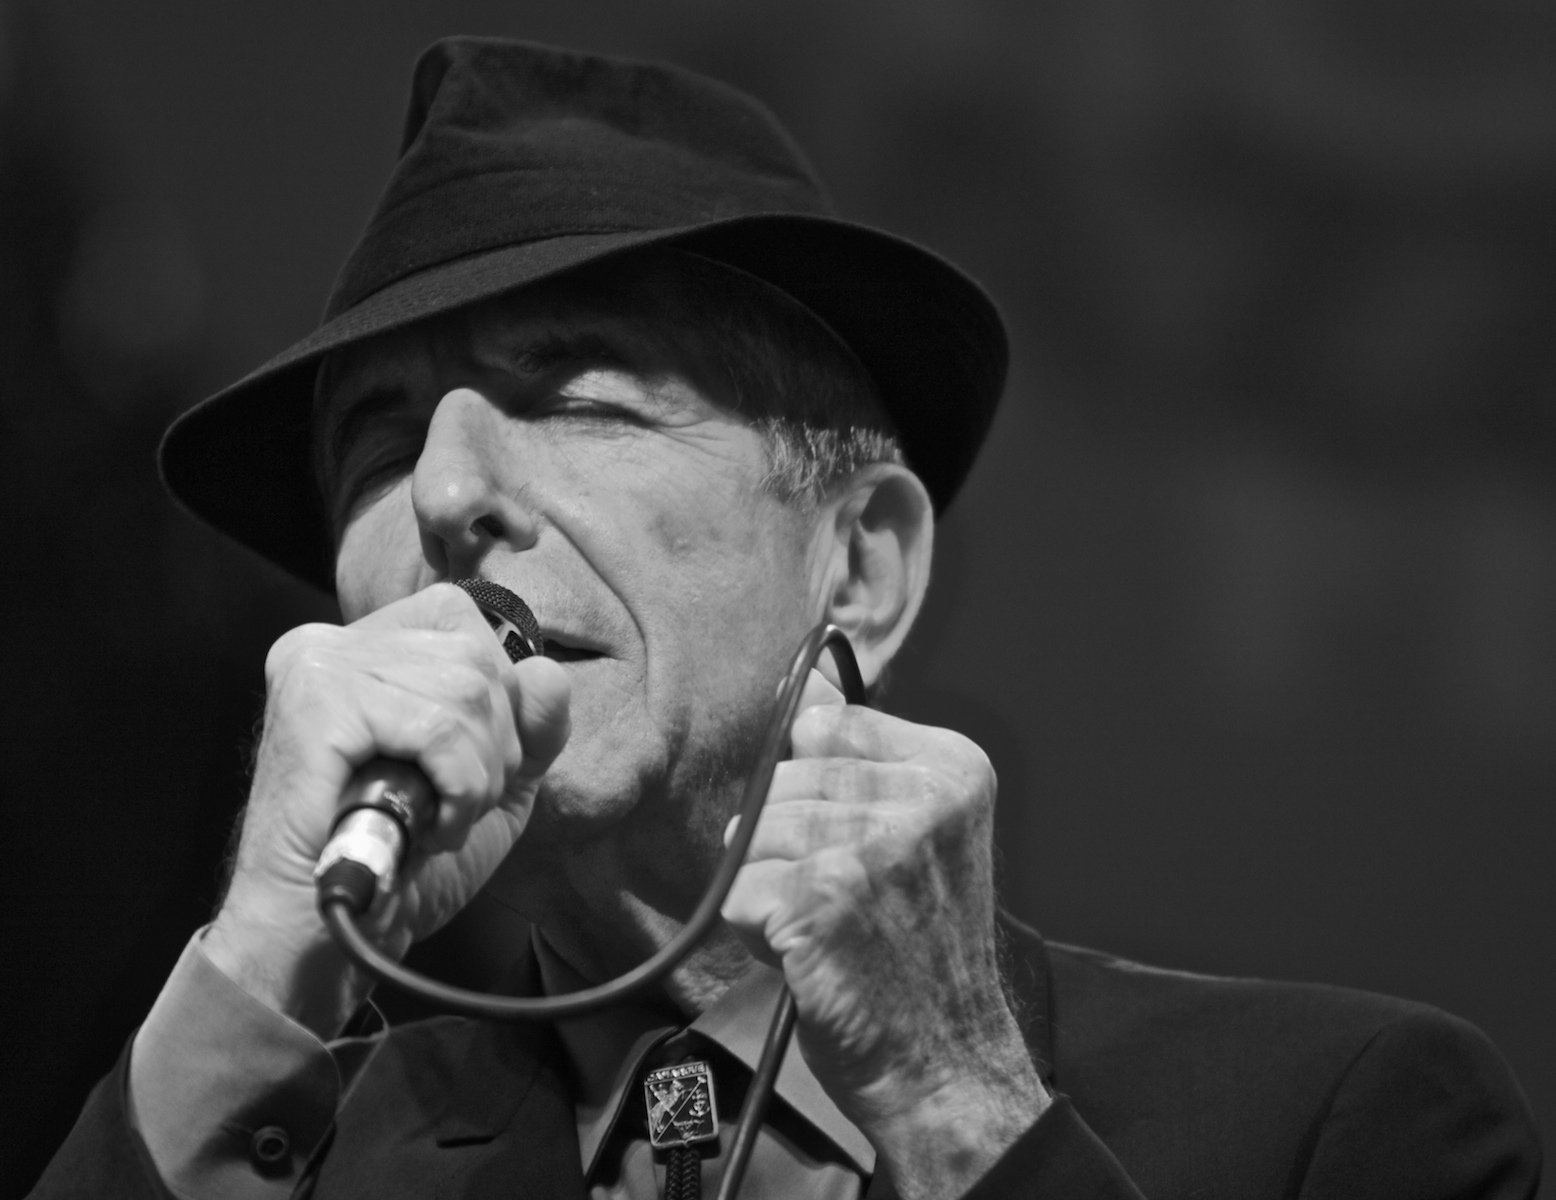 Title: Leonard Cohen at the Nice Jazz Festival 2008 14 | Author: Guillaume Laurent | Source: Own work | License: CC BY-NC-SA 2.0